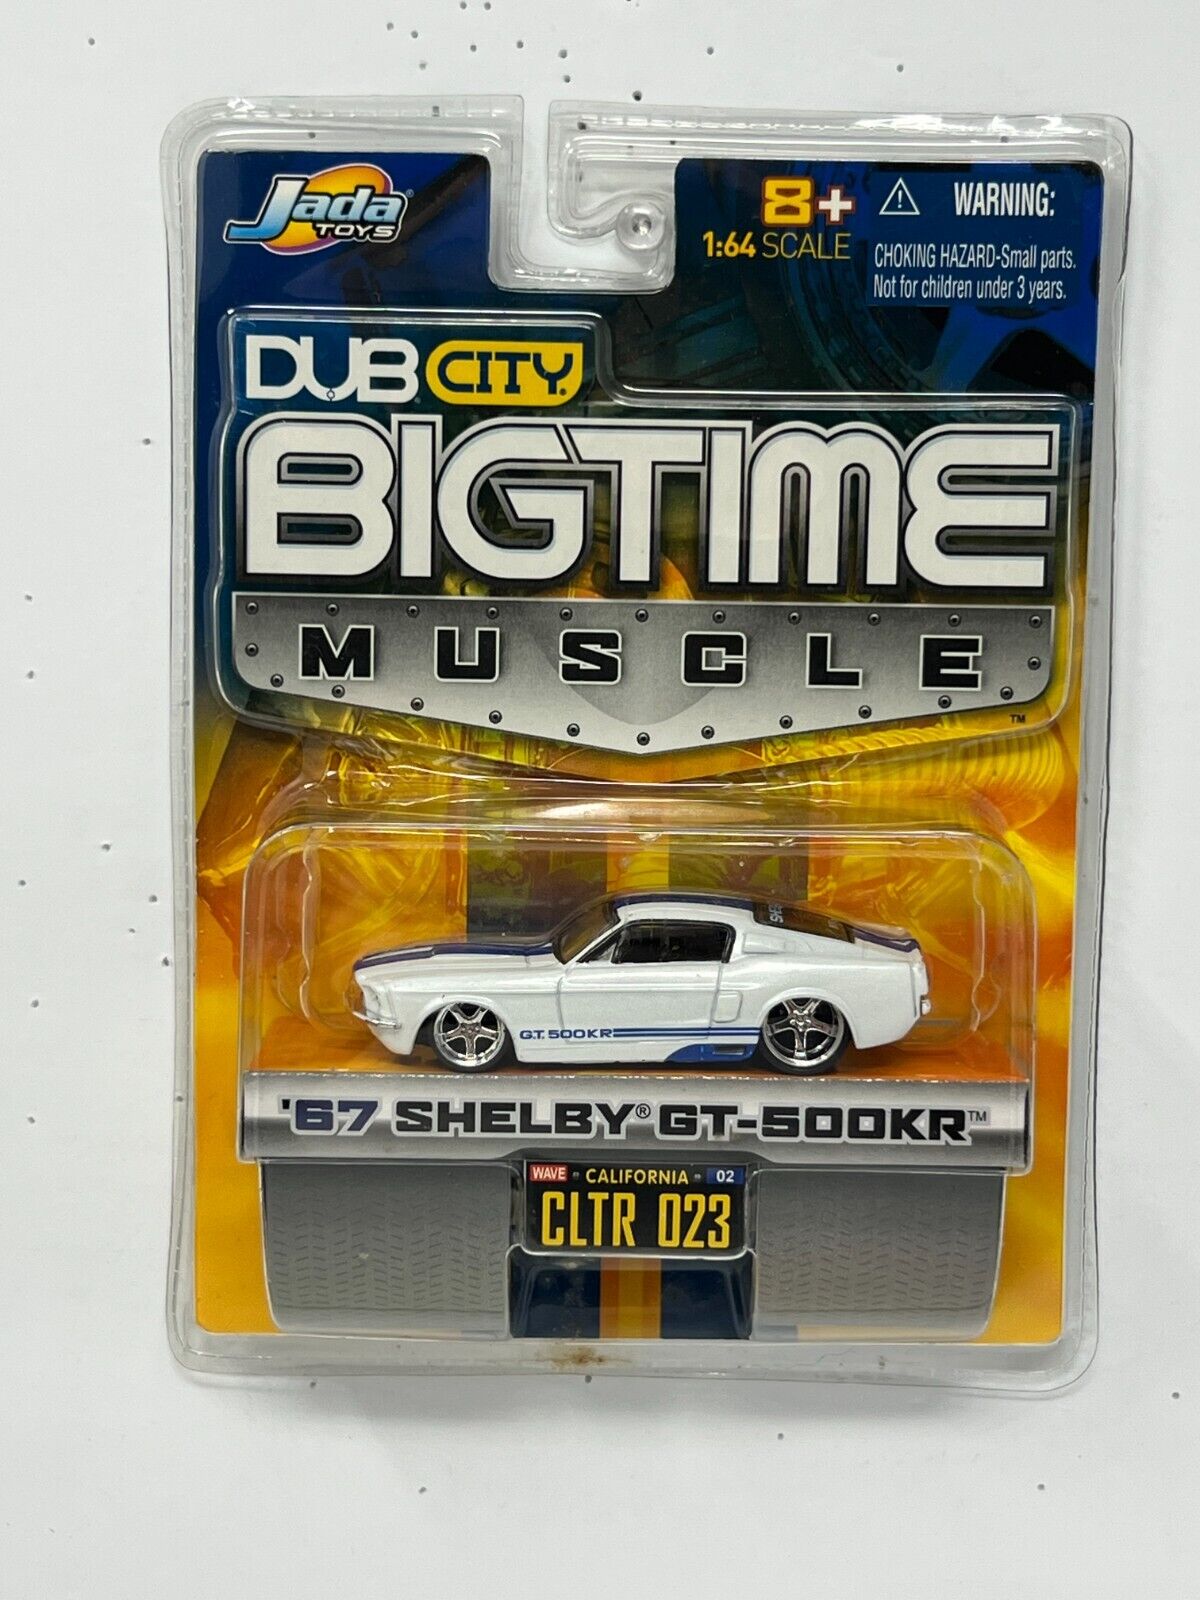 Jada Dub City Bigtime Muscle 1967 Shelby GT-500KR 1:64 Diecast White